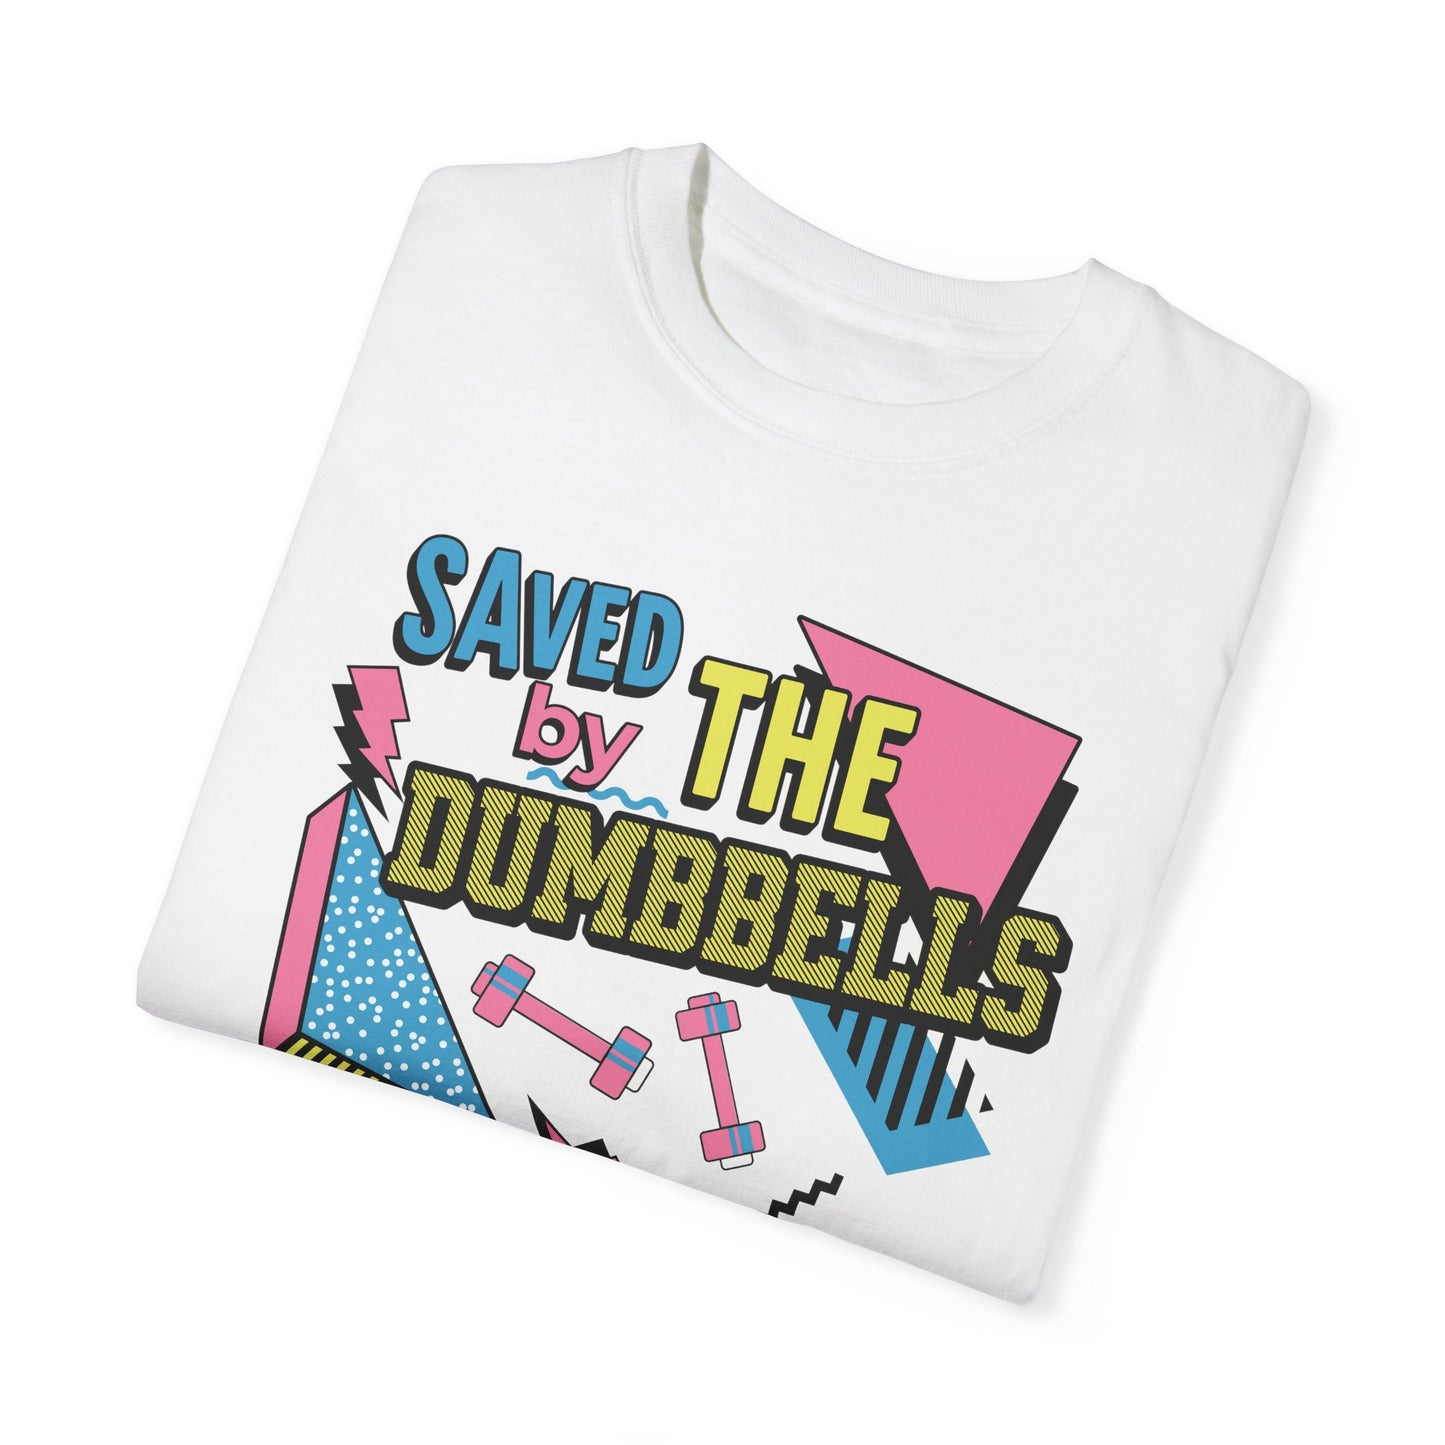 Saved By The Dumbbells, 90s Gym Shirt